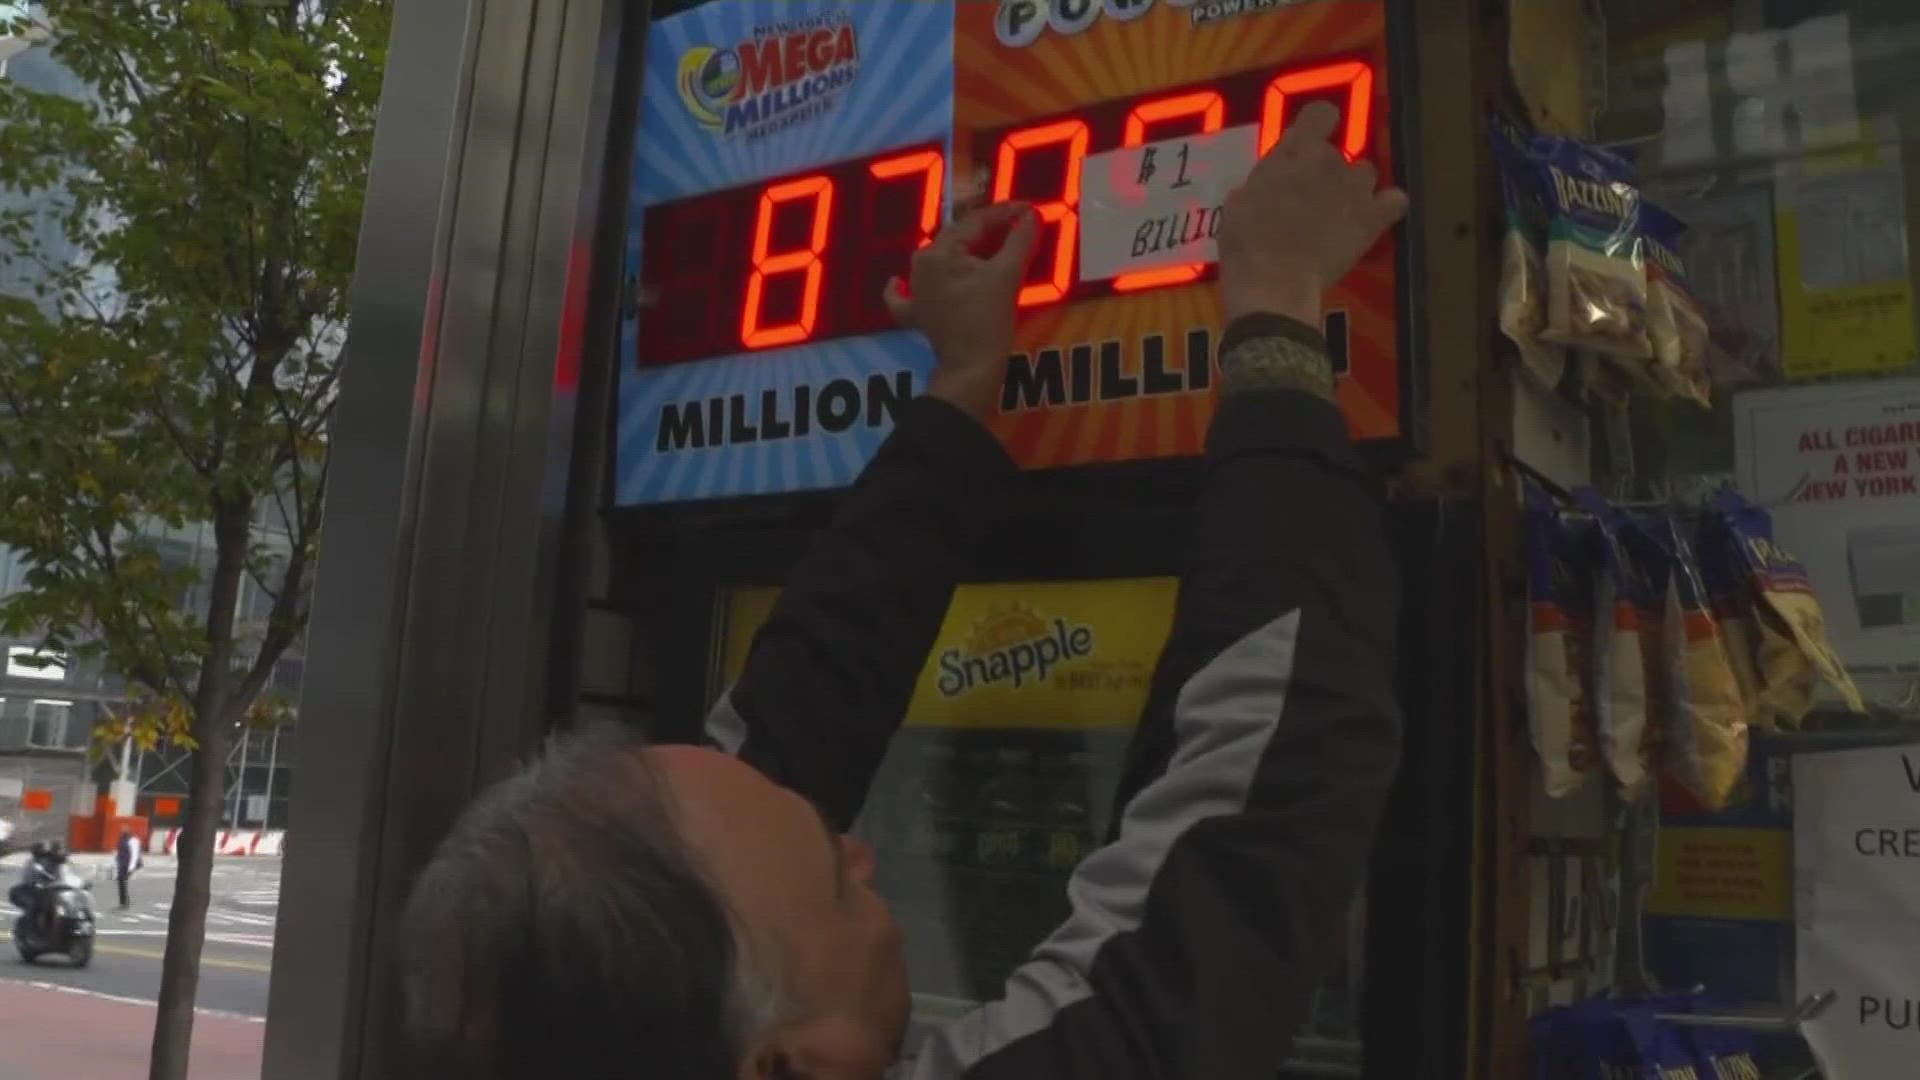 The Powerball prize is at $1.2 billion. That’s the second-highest jackpot ever.